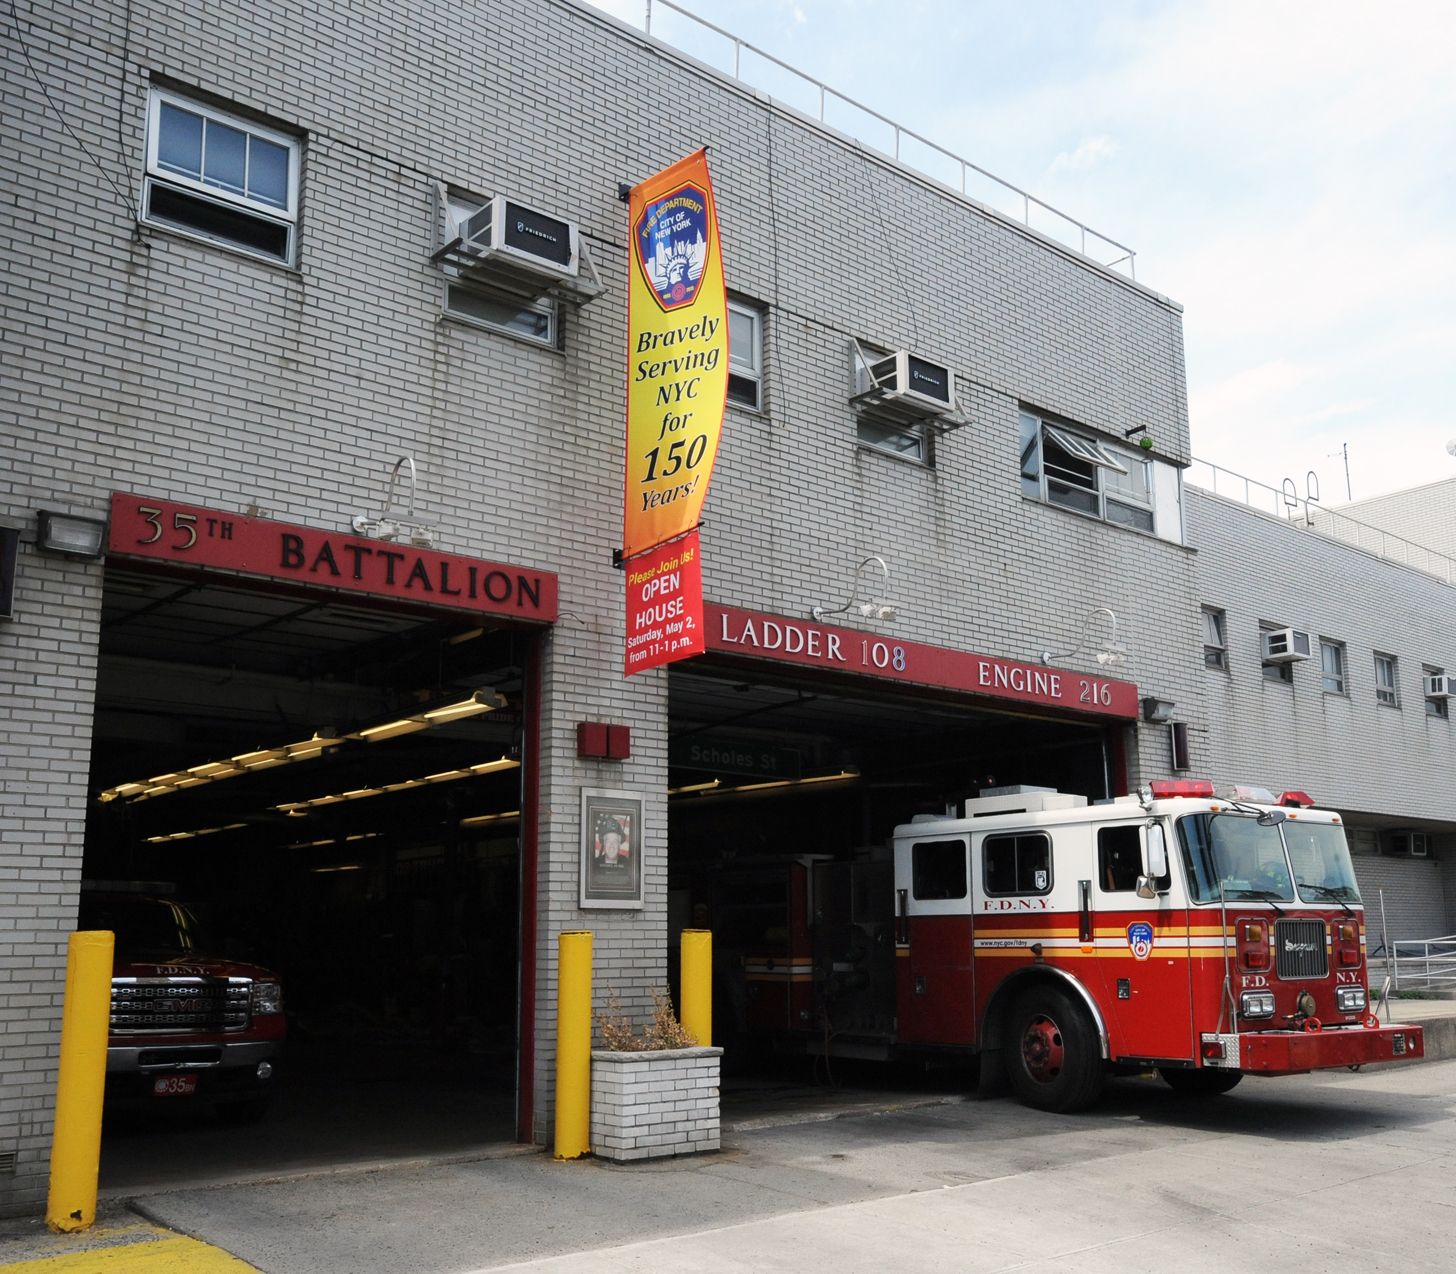 Saturday: FDNY Celebrates 150 Years With Free Firehouse Tours